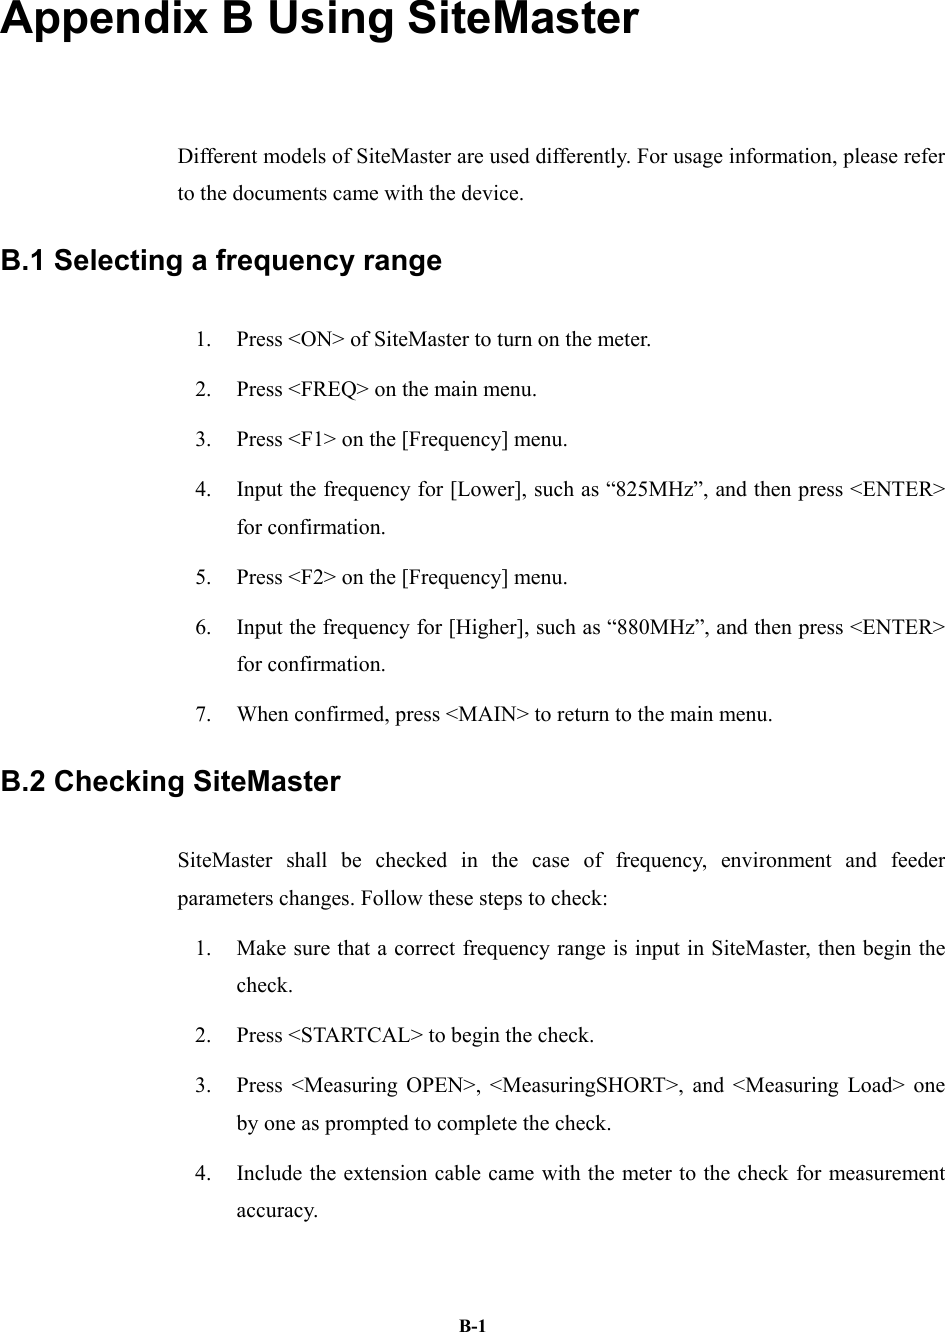   B-1Appendix B Using SiteMaster   Different models of SiteMaster are used differently. For usage information, please refer to the documents came with the device.   B.1 Selecting a frequency range 1.  Press &lt;ON&gt; of SiteMaster to turn on the meter.   2.  Press &lt;FREQ&gt; on the main menu. 3.  Press &lt;F1&gt; on the [Frequency] menu. 4.  Input the frequency for [Lower], such as “825MHz”, and then press &lt;ENTER&gt; for confirmation.   5.  Press &lt;F2&gt; on the [Frequency] menu. 6.  Input the frequency for [Higher], such as “880MHz”, and then press &lt;ENTER&gt; for confirmation.   7.  When confirmed, press &lt;MAIN&gt; to return to the main menu.   B.2 Checking SiteMaster   SiteMaster shall be checked in the case of frequency, environment and feeder parameters changes. Follow these steps to check: 1.  Make sure that a correct frequency range is input in SiteMaster, then begin the check.  2.  Press &lt;STARTCAL&gt; to begin the check.   3.  Press &lt;Measuring OPEN&gt;, &lt;MeasuringSHORT&gt;, and &lt;Measuring Load&gt; one by one as prompted to complete the check.   4.  Include the extension cable came with the meter to the check for measurement accuracy. 